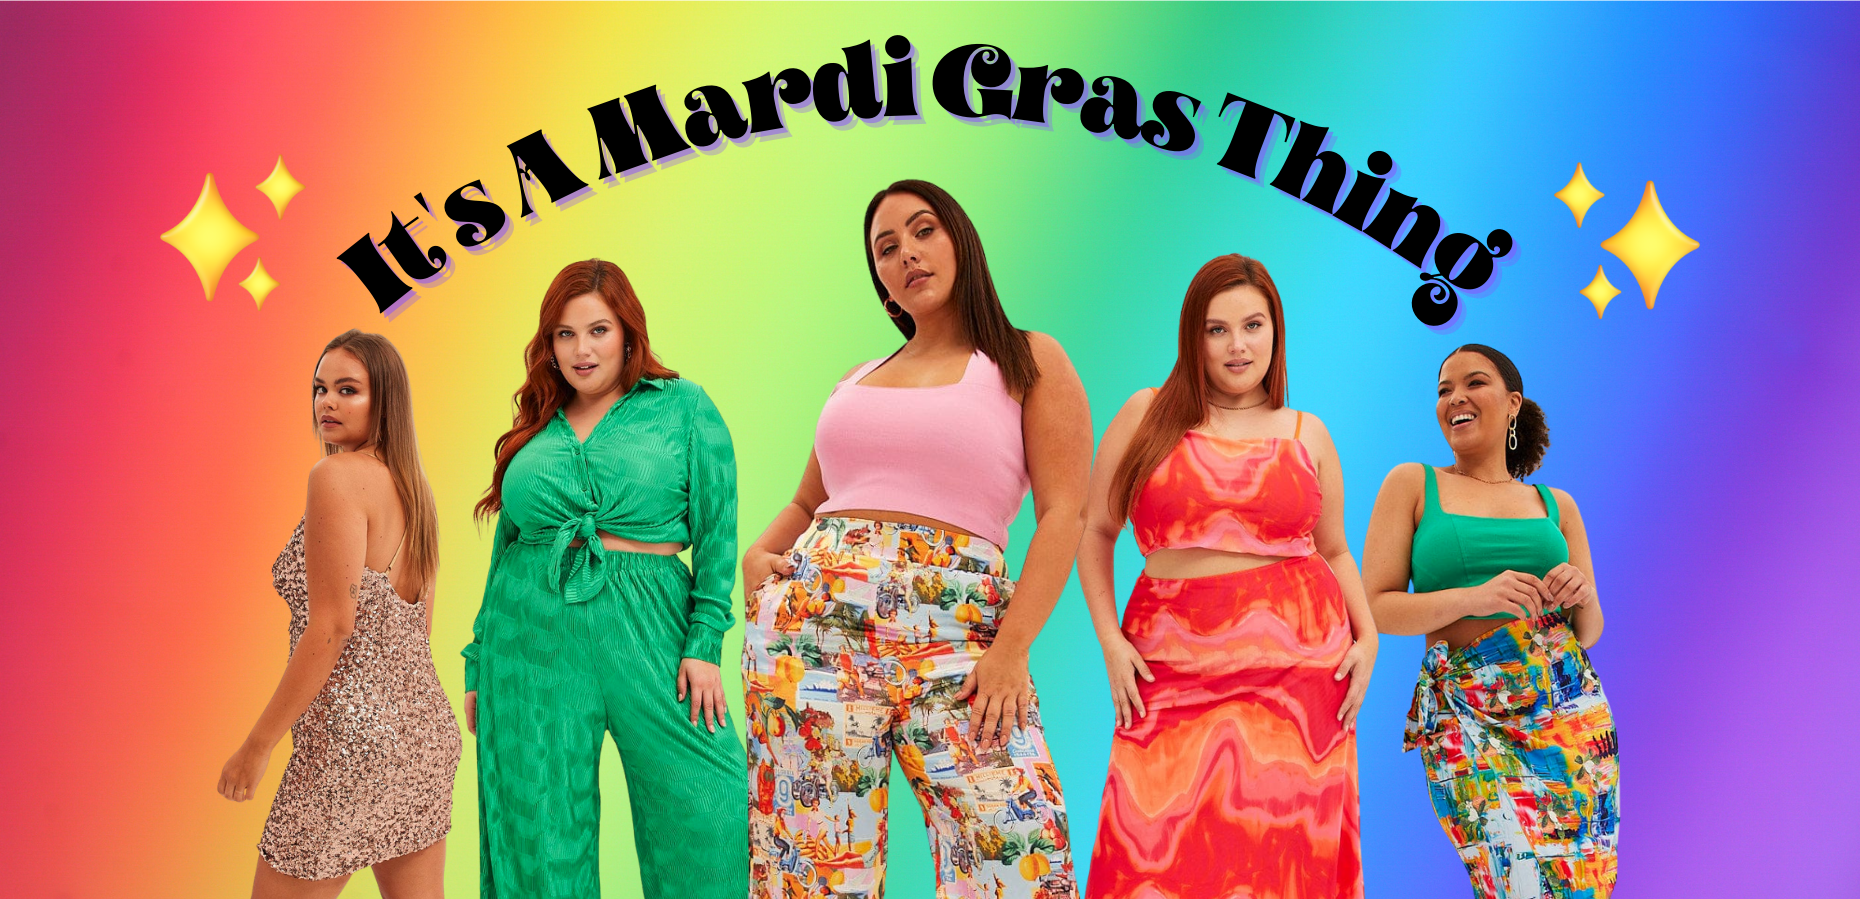 Your Guide To: Mardi Gras Looks, Blog